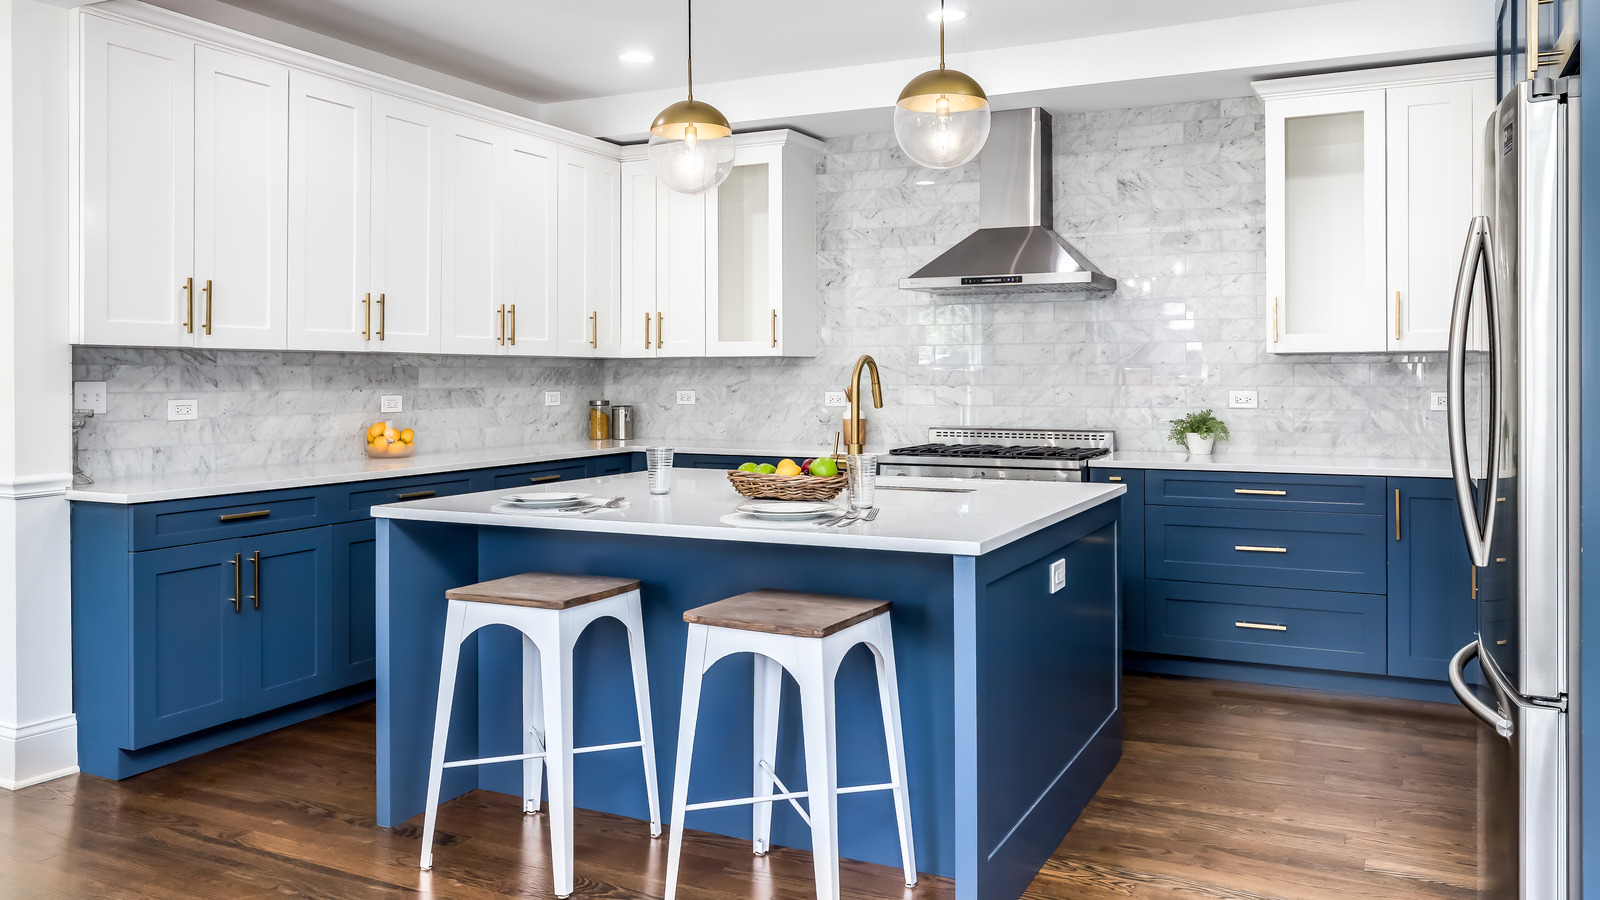 https://www.housedigest.com/img/gallery/20-blue-kitchen-ideas-youll-absolutely-love/l-intro-1669894578.jpg